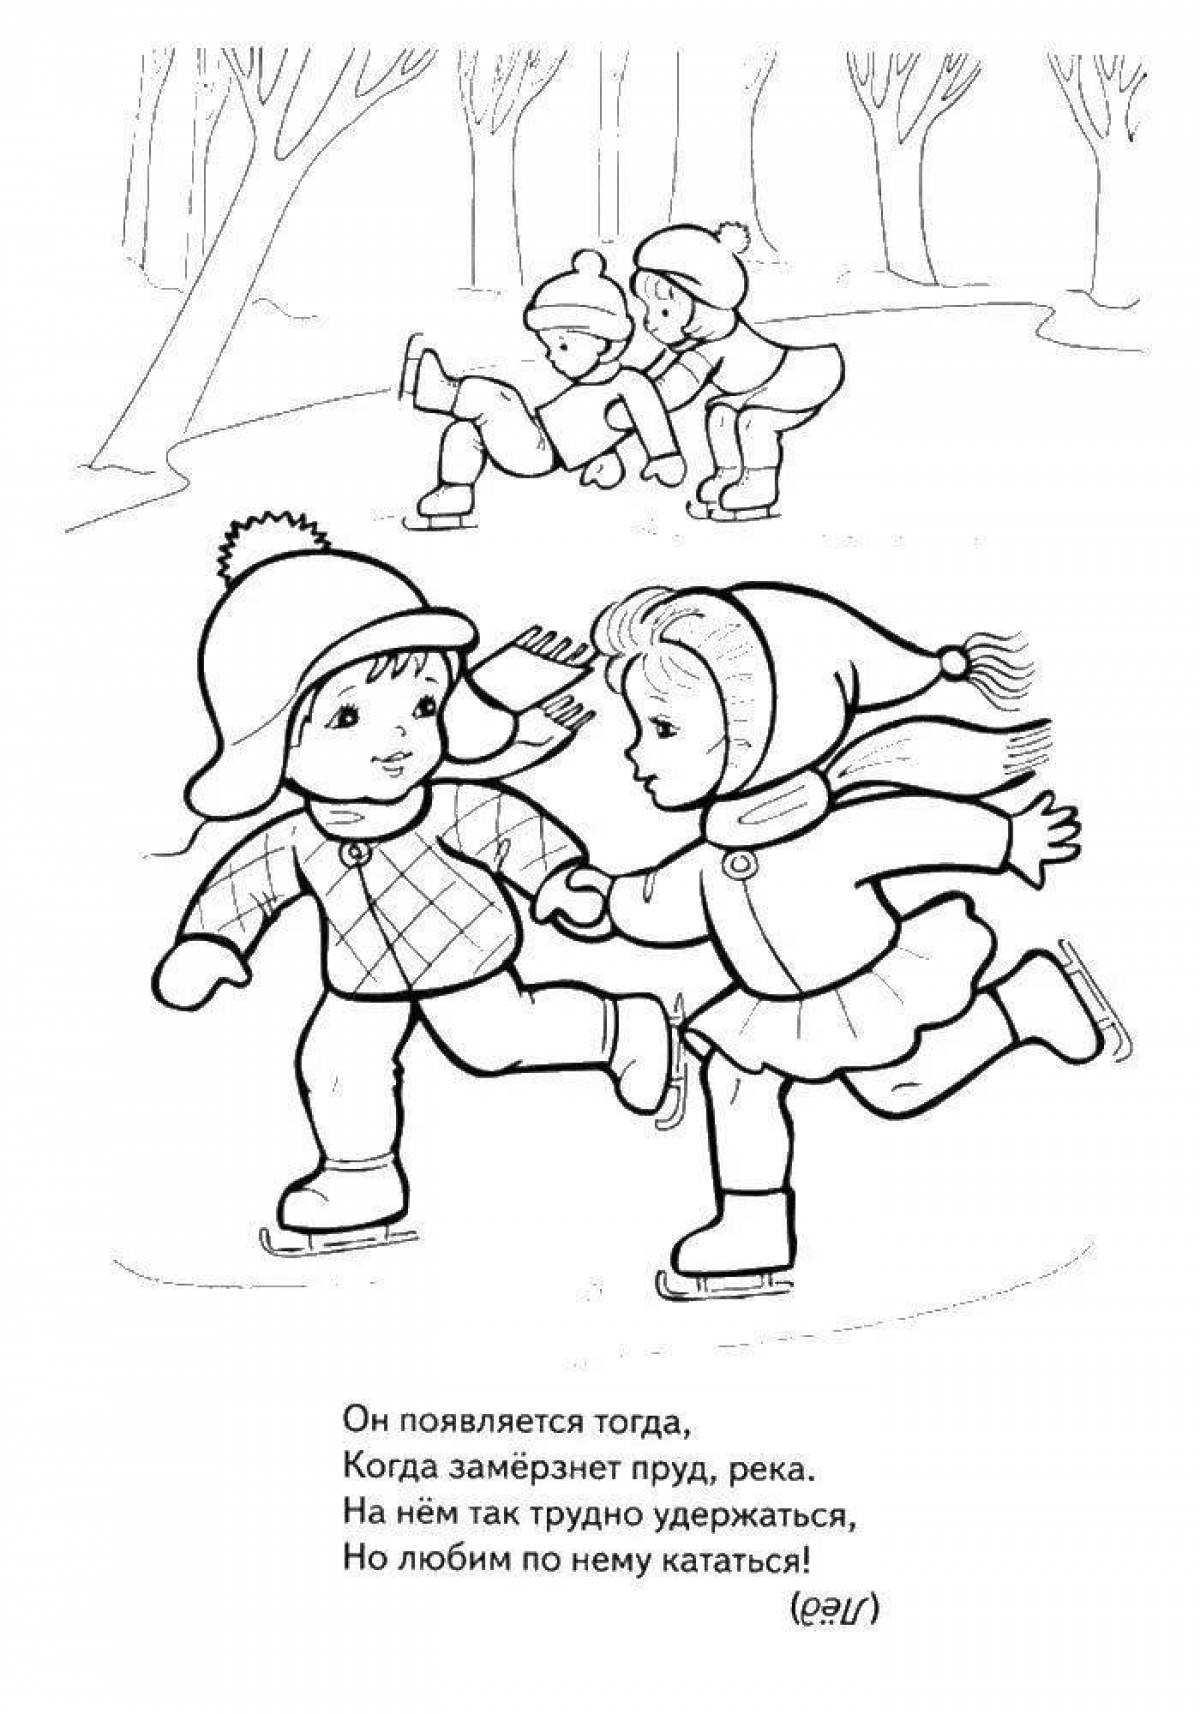 Amazing ice coloring page